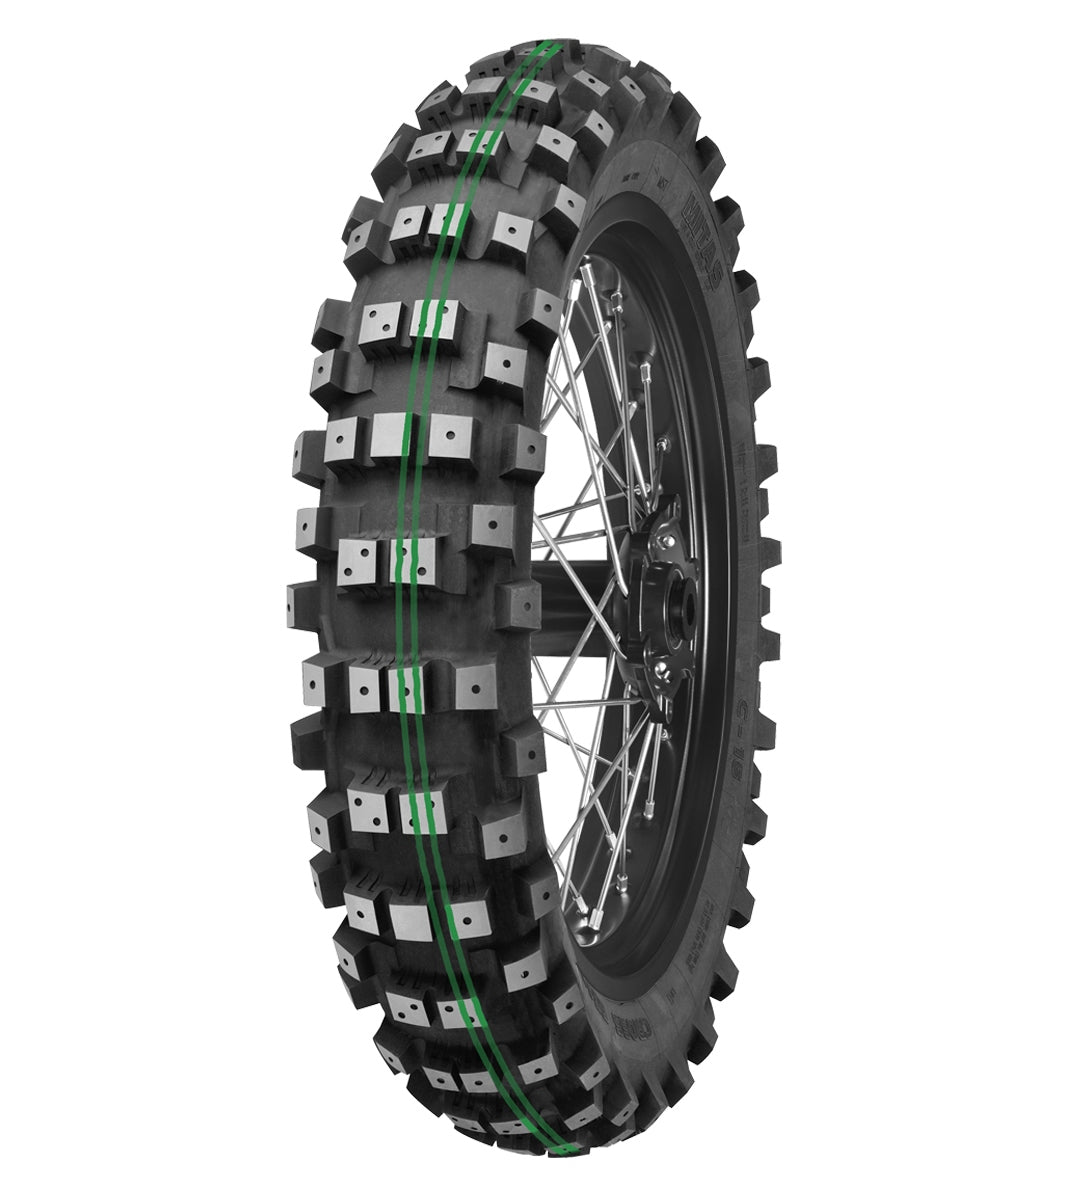 Mitas C-16 STONEATER 110/100-18 Enduro Competition Off-Road SUPER SOFT EXTREME 64M 2 Green Tube Rear Tire, 226457, 110/100-18, C-16 StonEater, Enduro, Enduro Competition, Off-Road, Rear, Tires - Imported and distributed in North &amp; South America by Lindeco Genuine Powersports - Premier Powersports Equipment and Accessories for Motorcycle Enthusiasts, Professional Riders and Dealers.